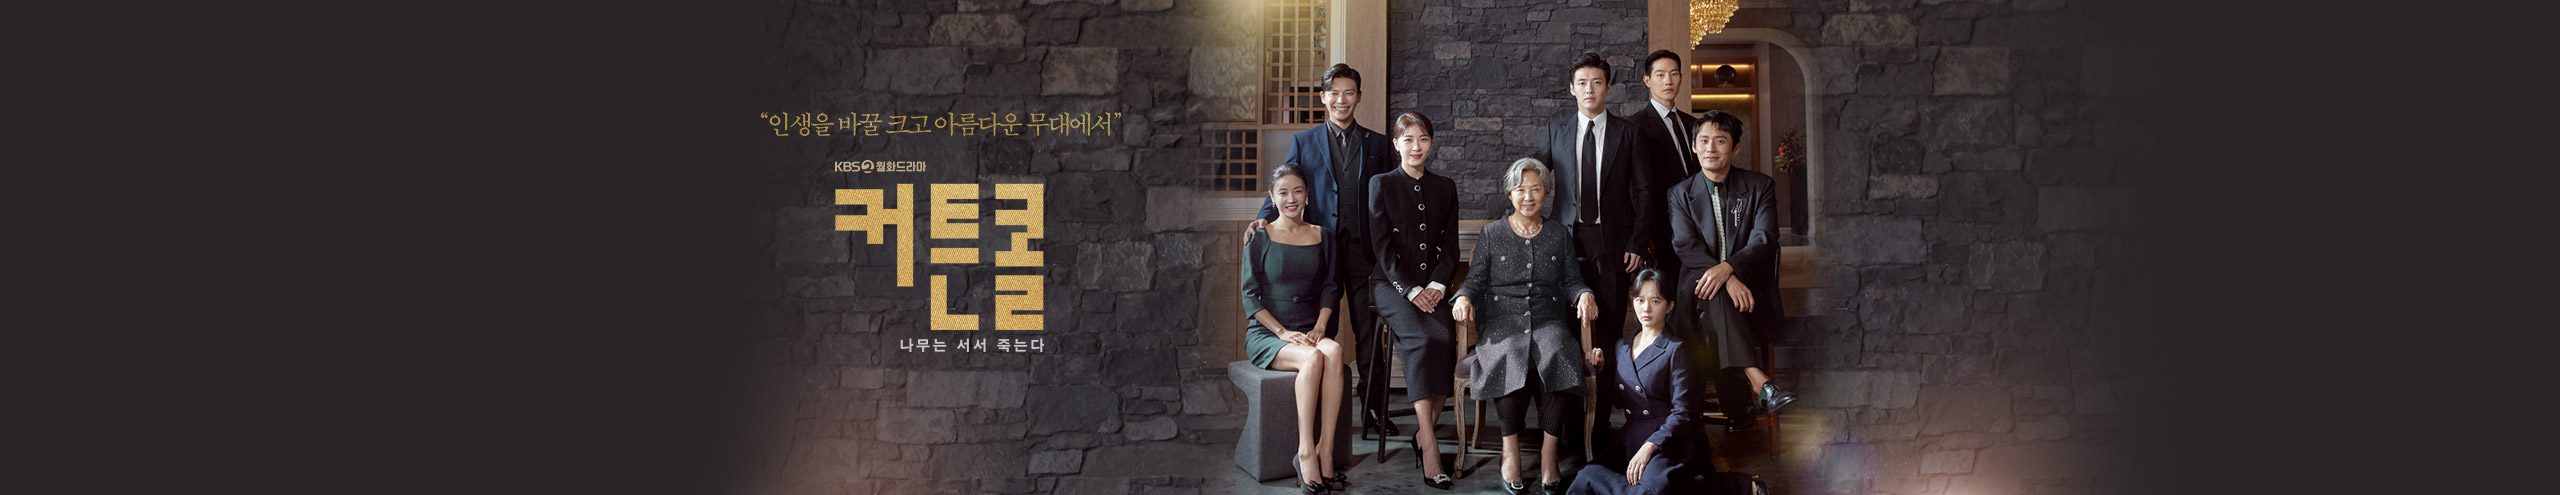 Curtain Call Episode 7: Release Date
Credit to: KBS, Viki